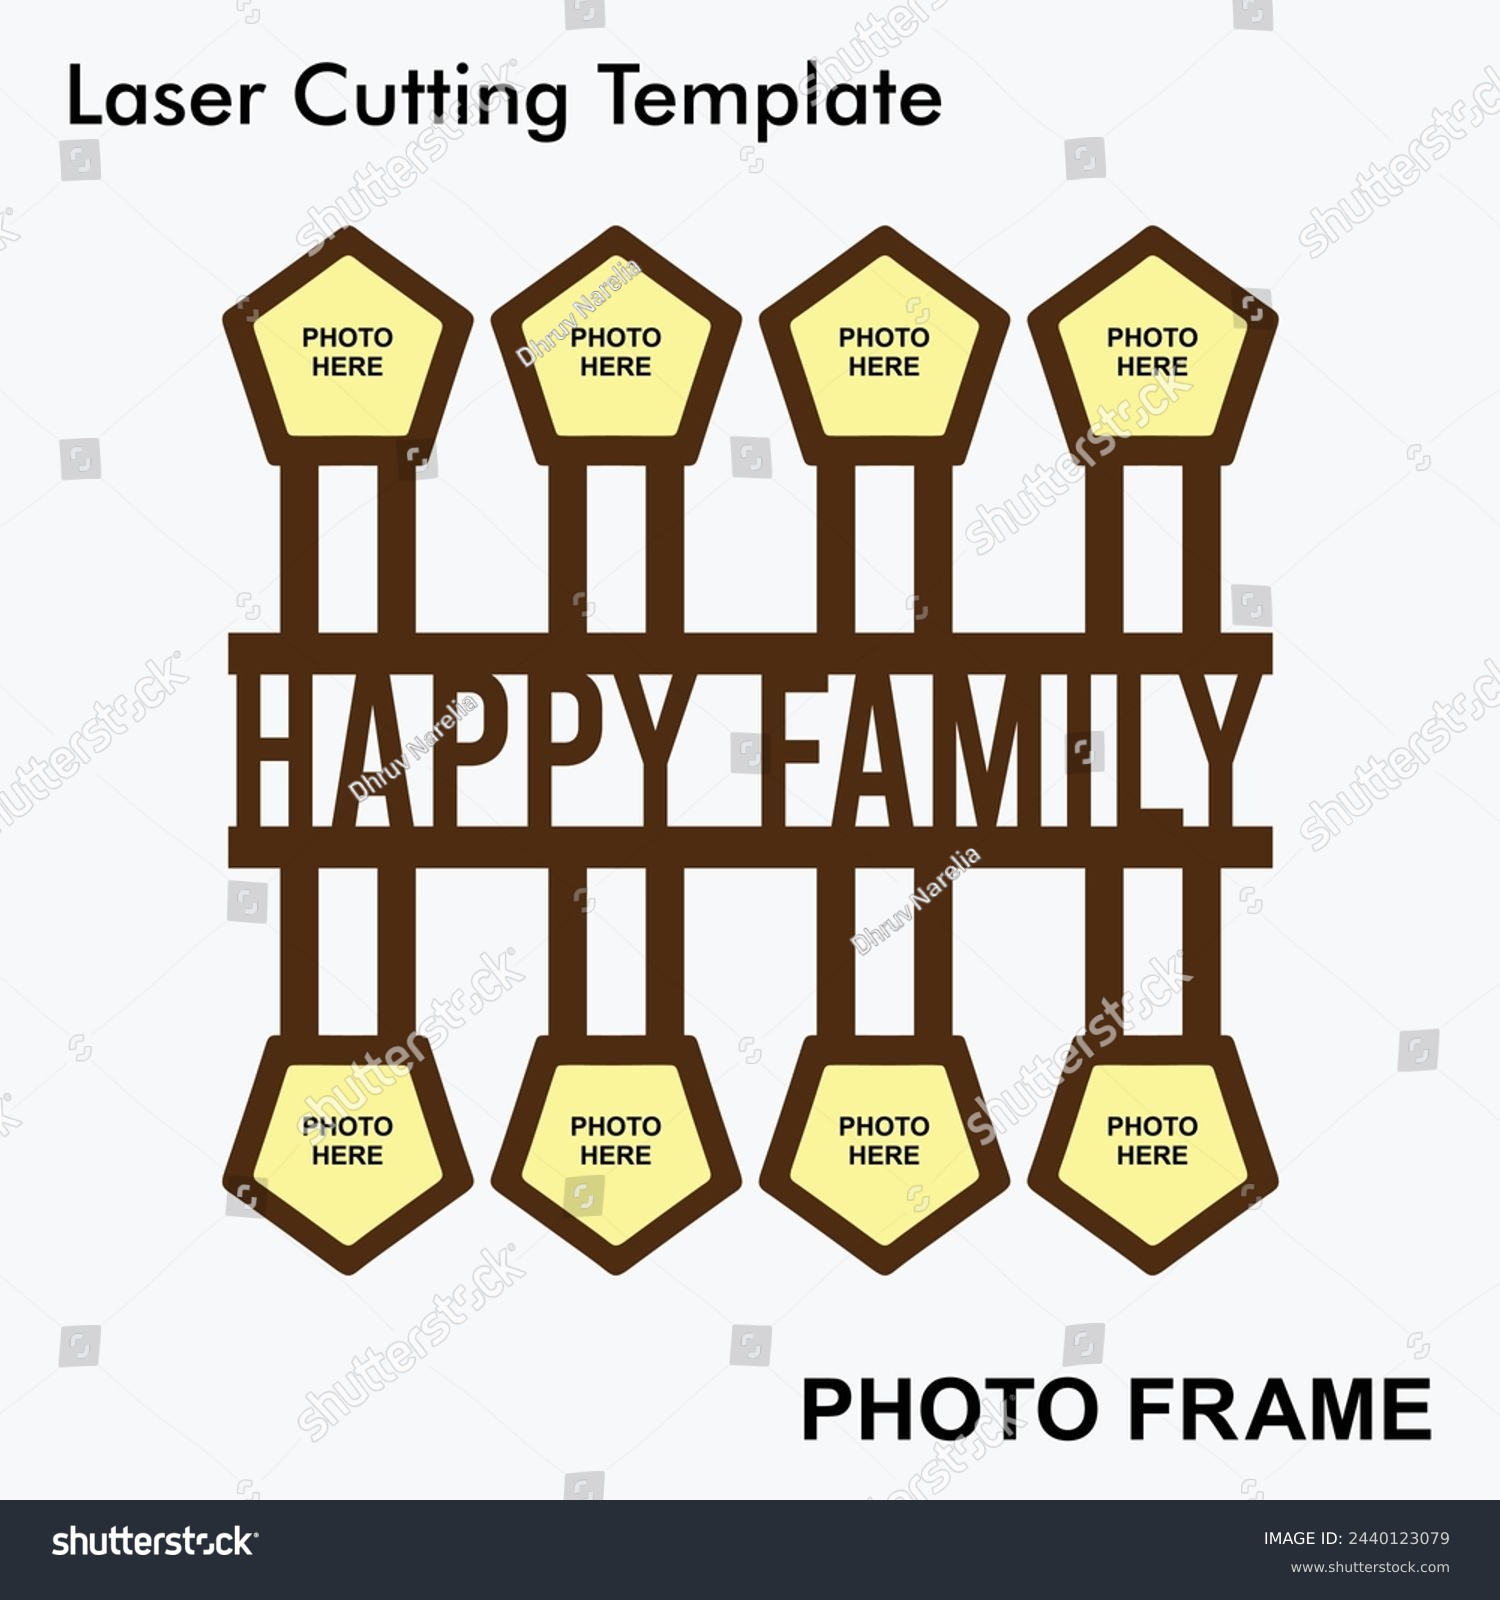 SVG of Happy Family laser cut photo frame with 8 photo. Home decor wooden sublimation frame template. Suitable for home and room decor. Laser cut photo frame template design for mdf and acrylic cutting. svg